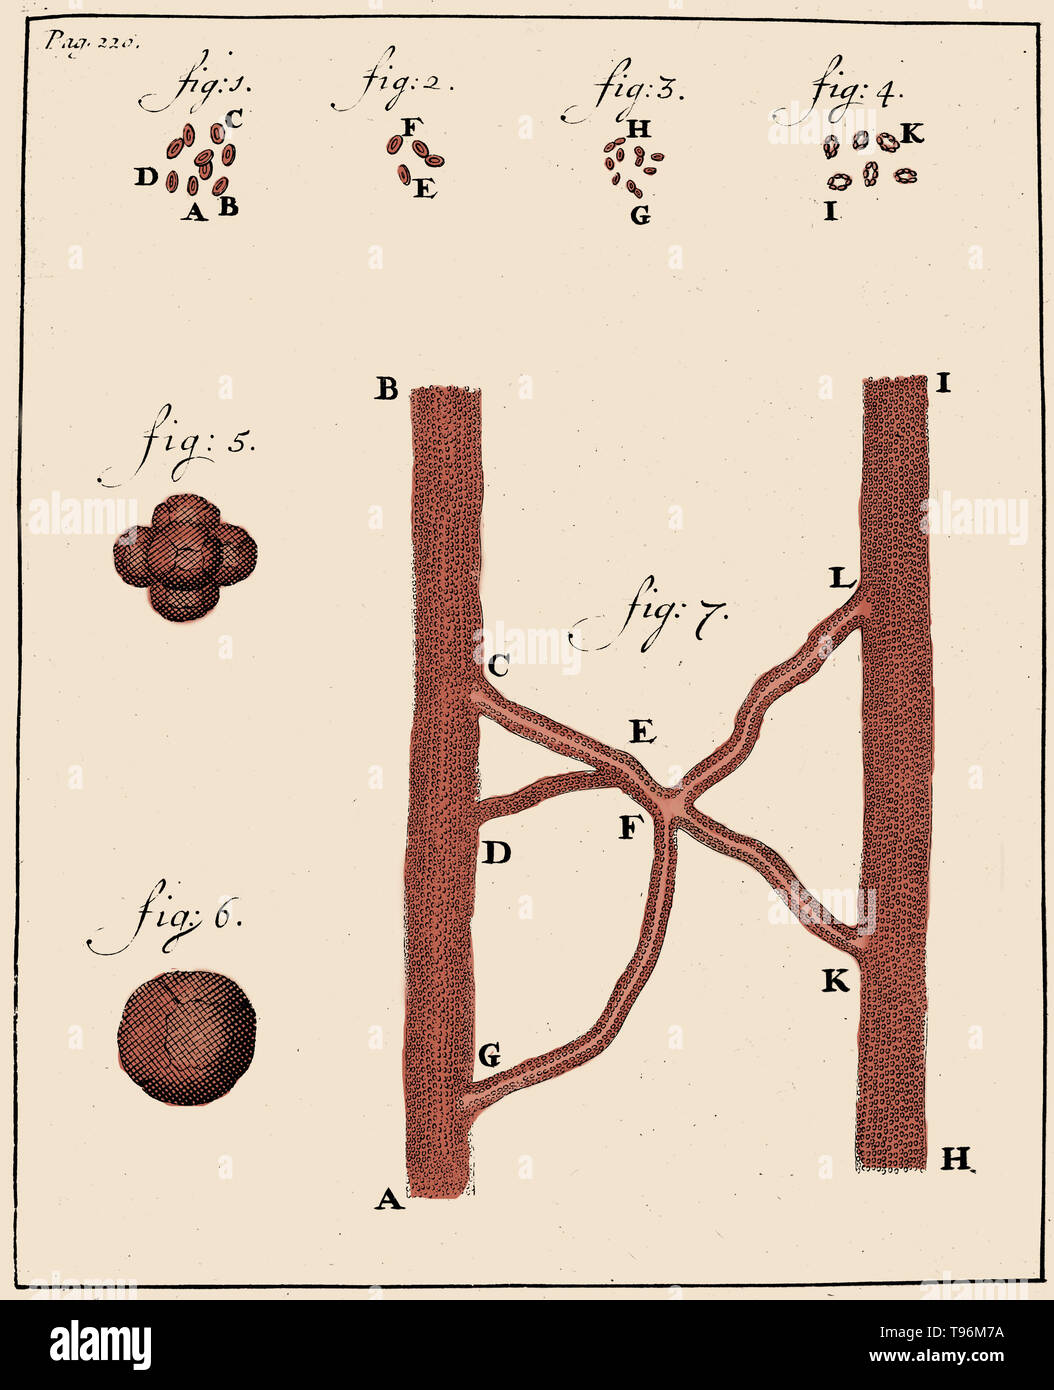 Blood corpuscles, Anthony van Leeuwenhoek, 1719. Woodcut showing spermatozoa of rabbit (figs. 1-4) and dog (figs. 5-8), observed and drawn by Anthony van Leeuwenhoek, 1677. Leeuwenhoek (1632-1723) was a Dutch scientist, now considered the first microbiologist. He is best known for his work on the improvement of the microscope and for his contributions towards the establishment of microbiology. Stock Photo